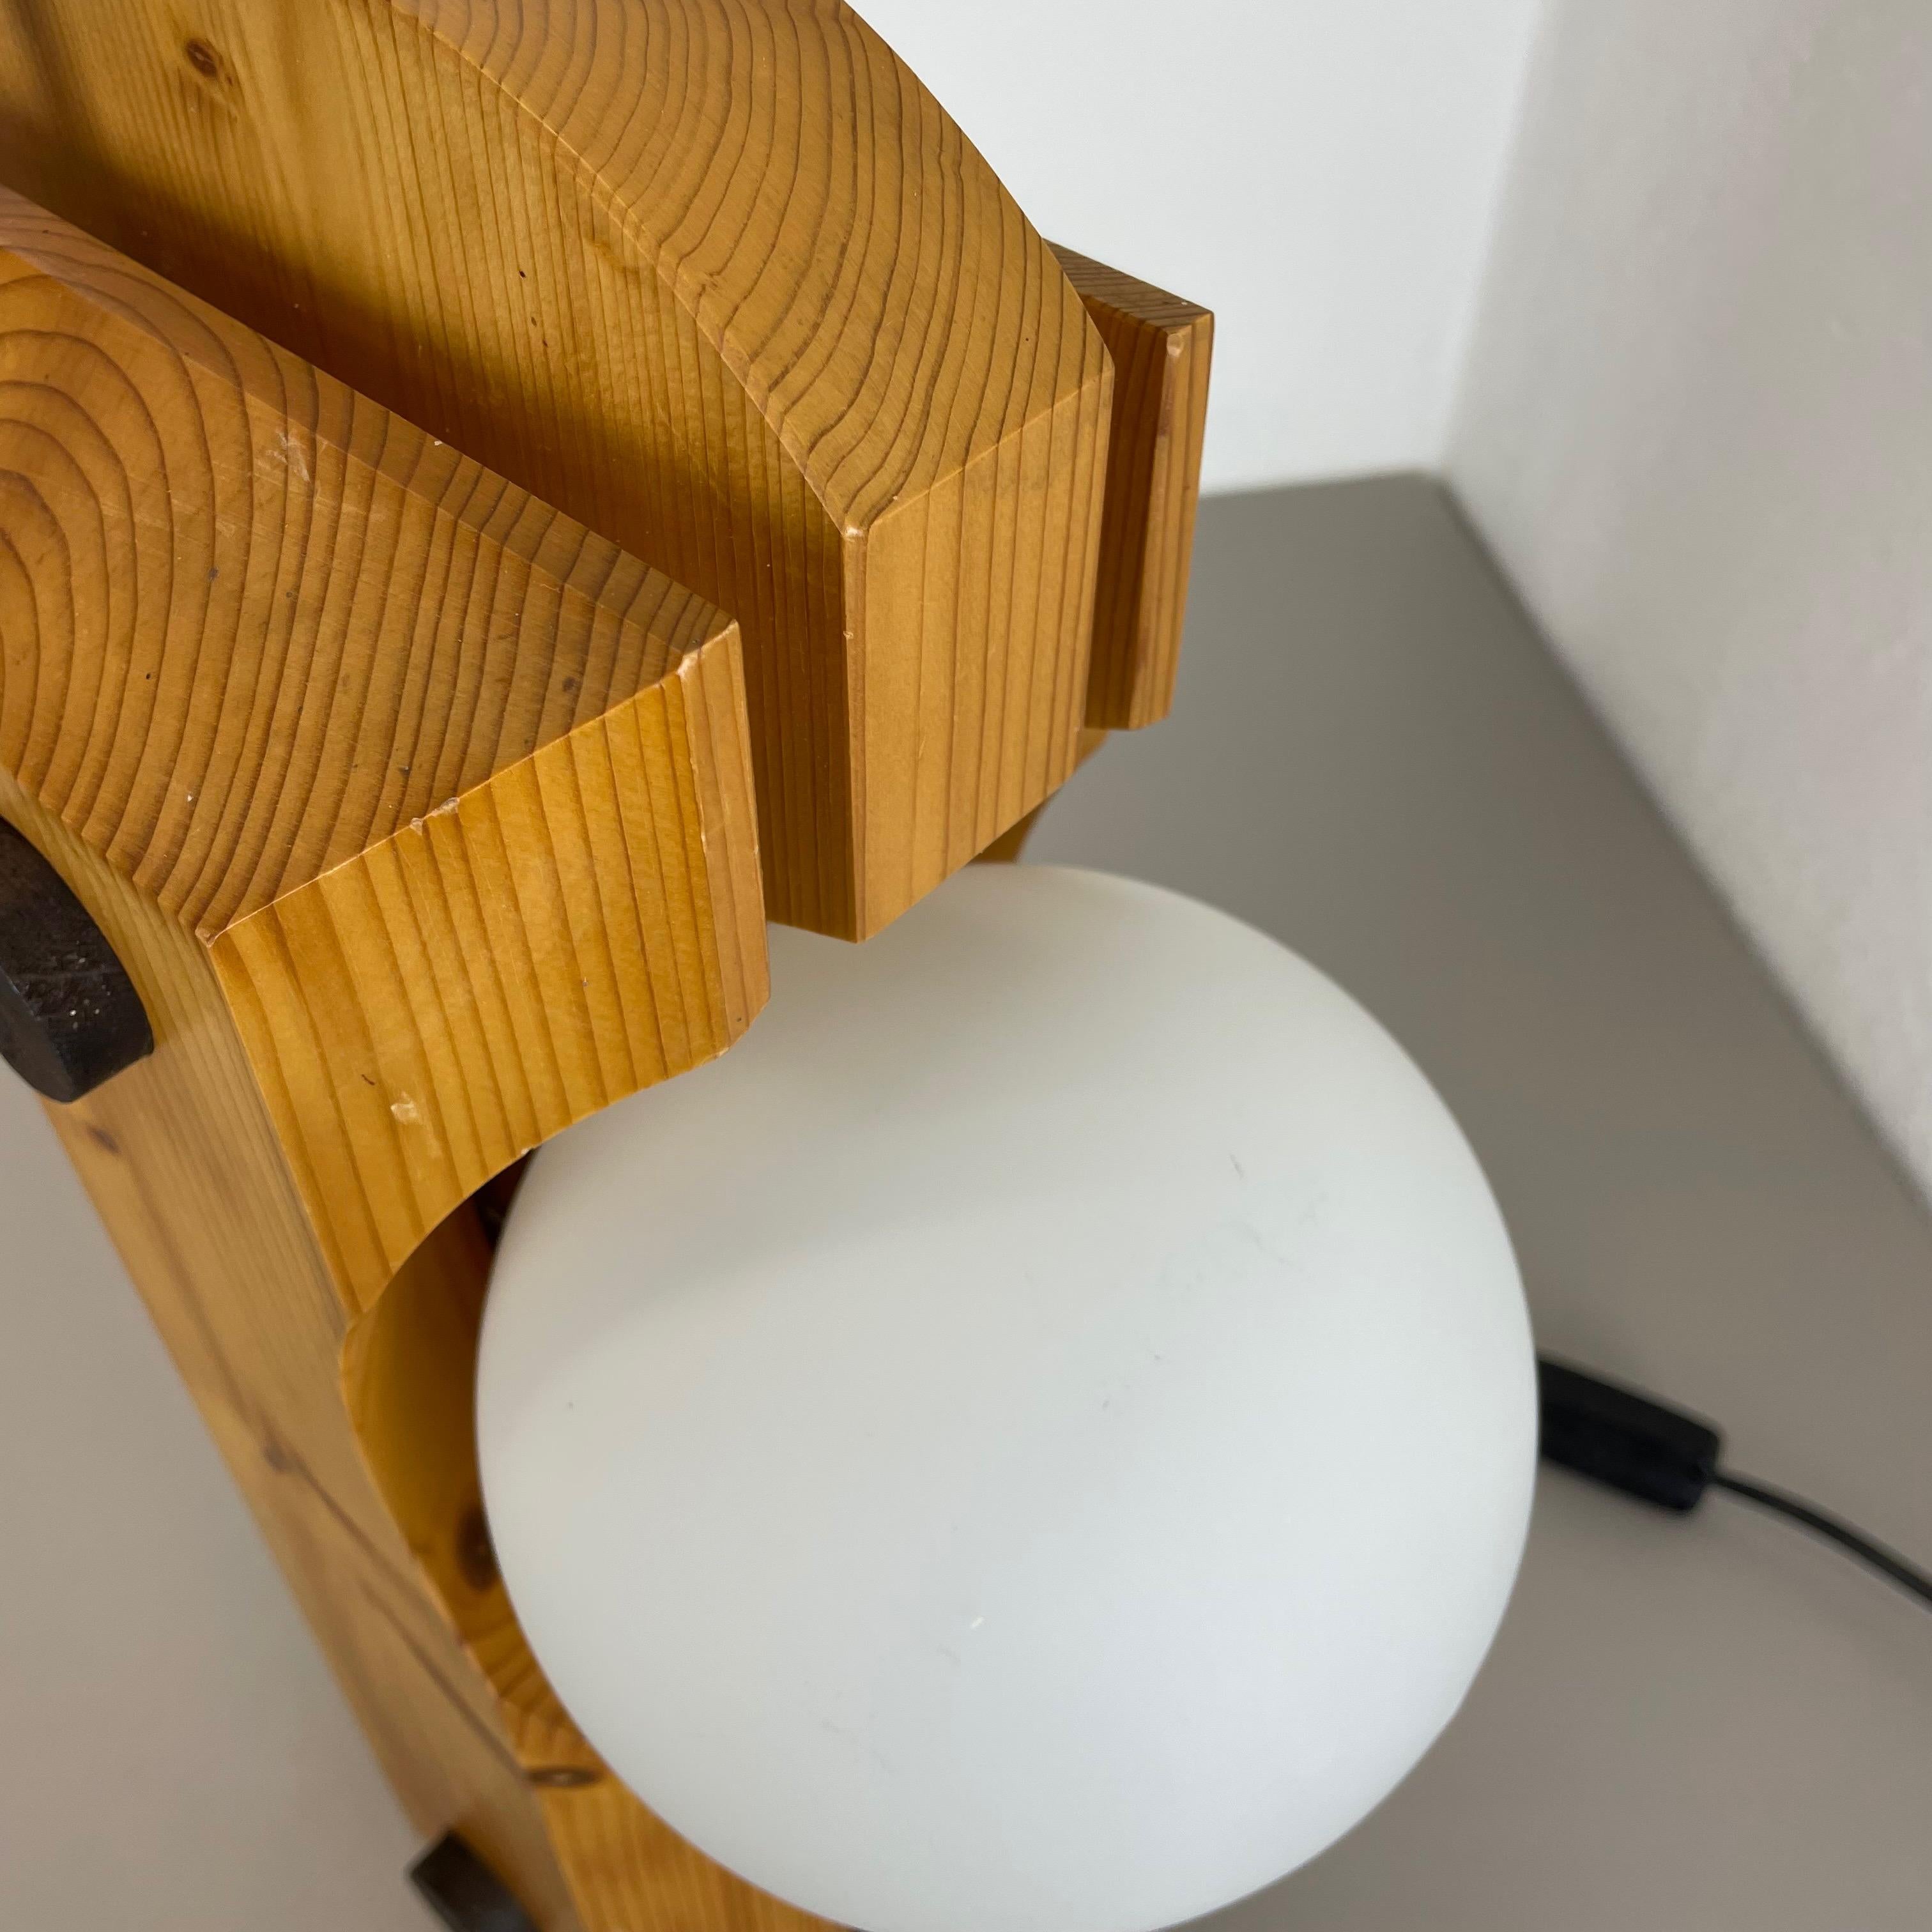 Large Organic Sculptural PINE Wooden Table Light by Temde Lights, Germany 1970s For Sale 1